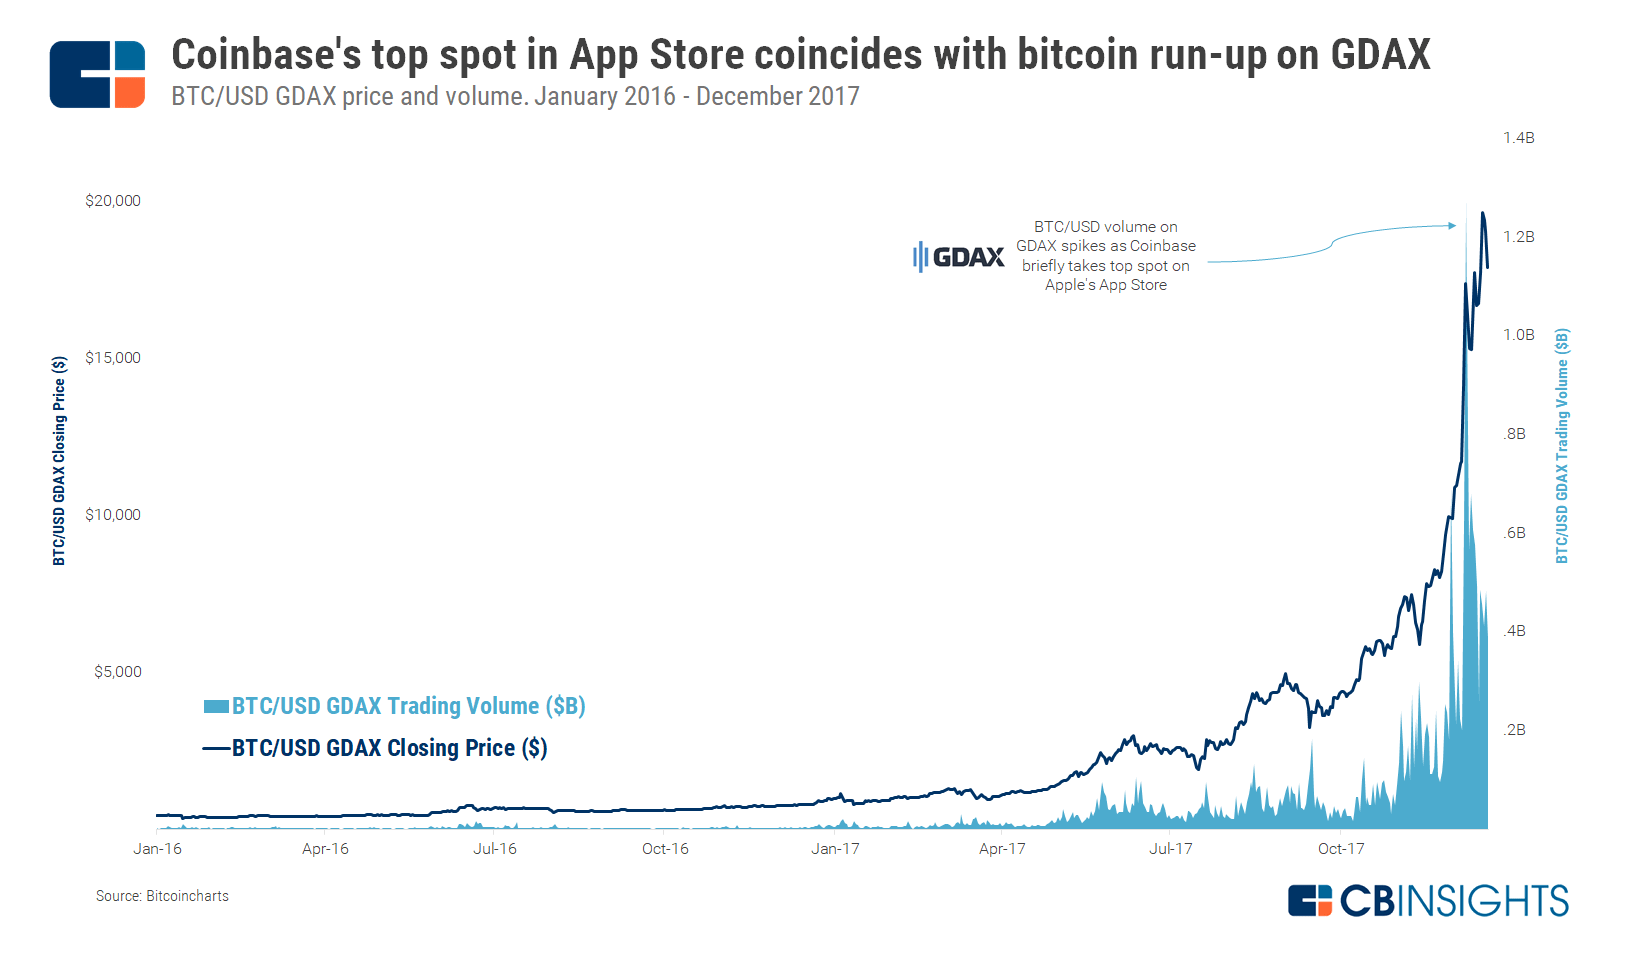 Coinbase's top spot in App Store coincides with bitcoin run-up on GDAX